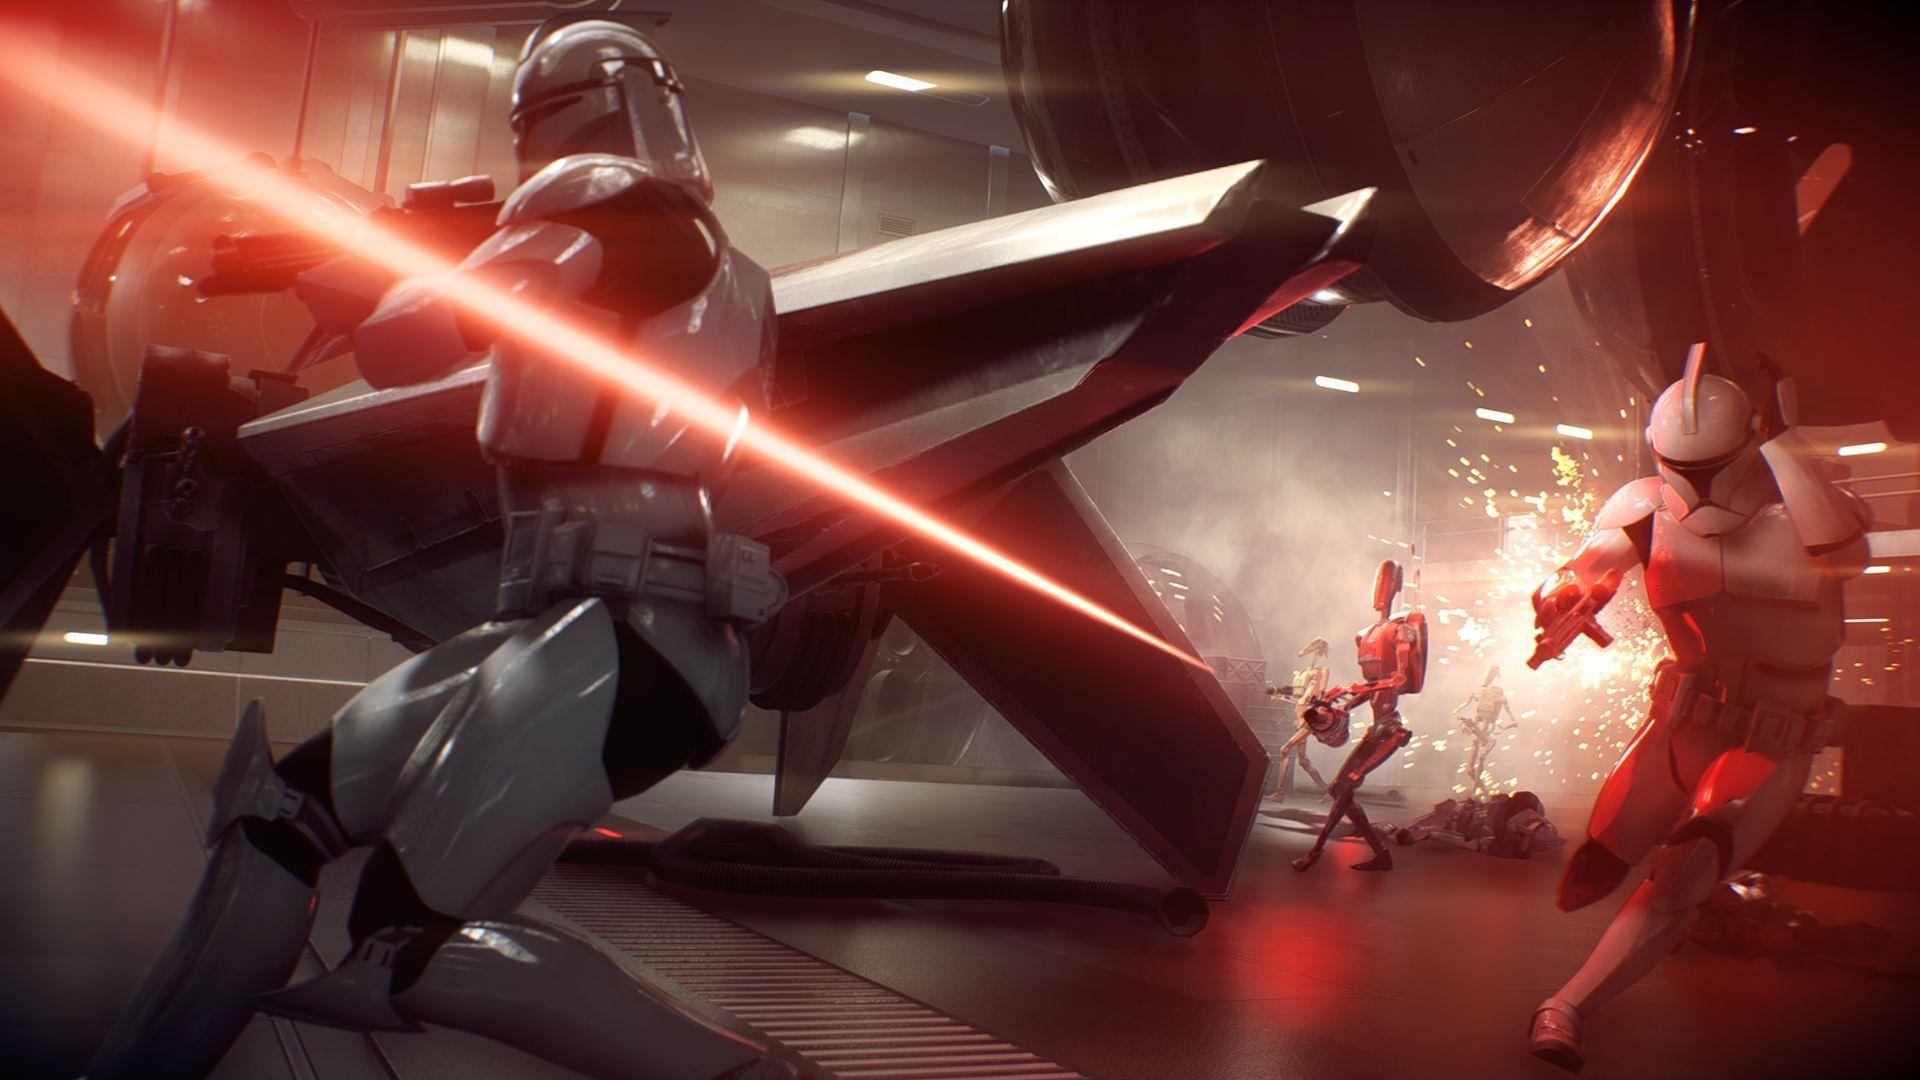 Report: EA Vancouver's Star Wars game has been cancelled